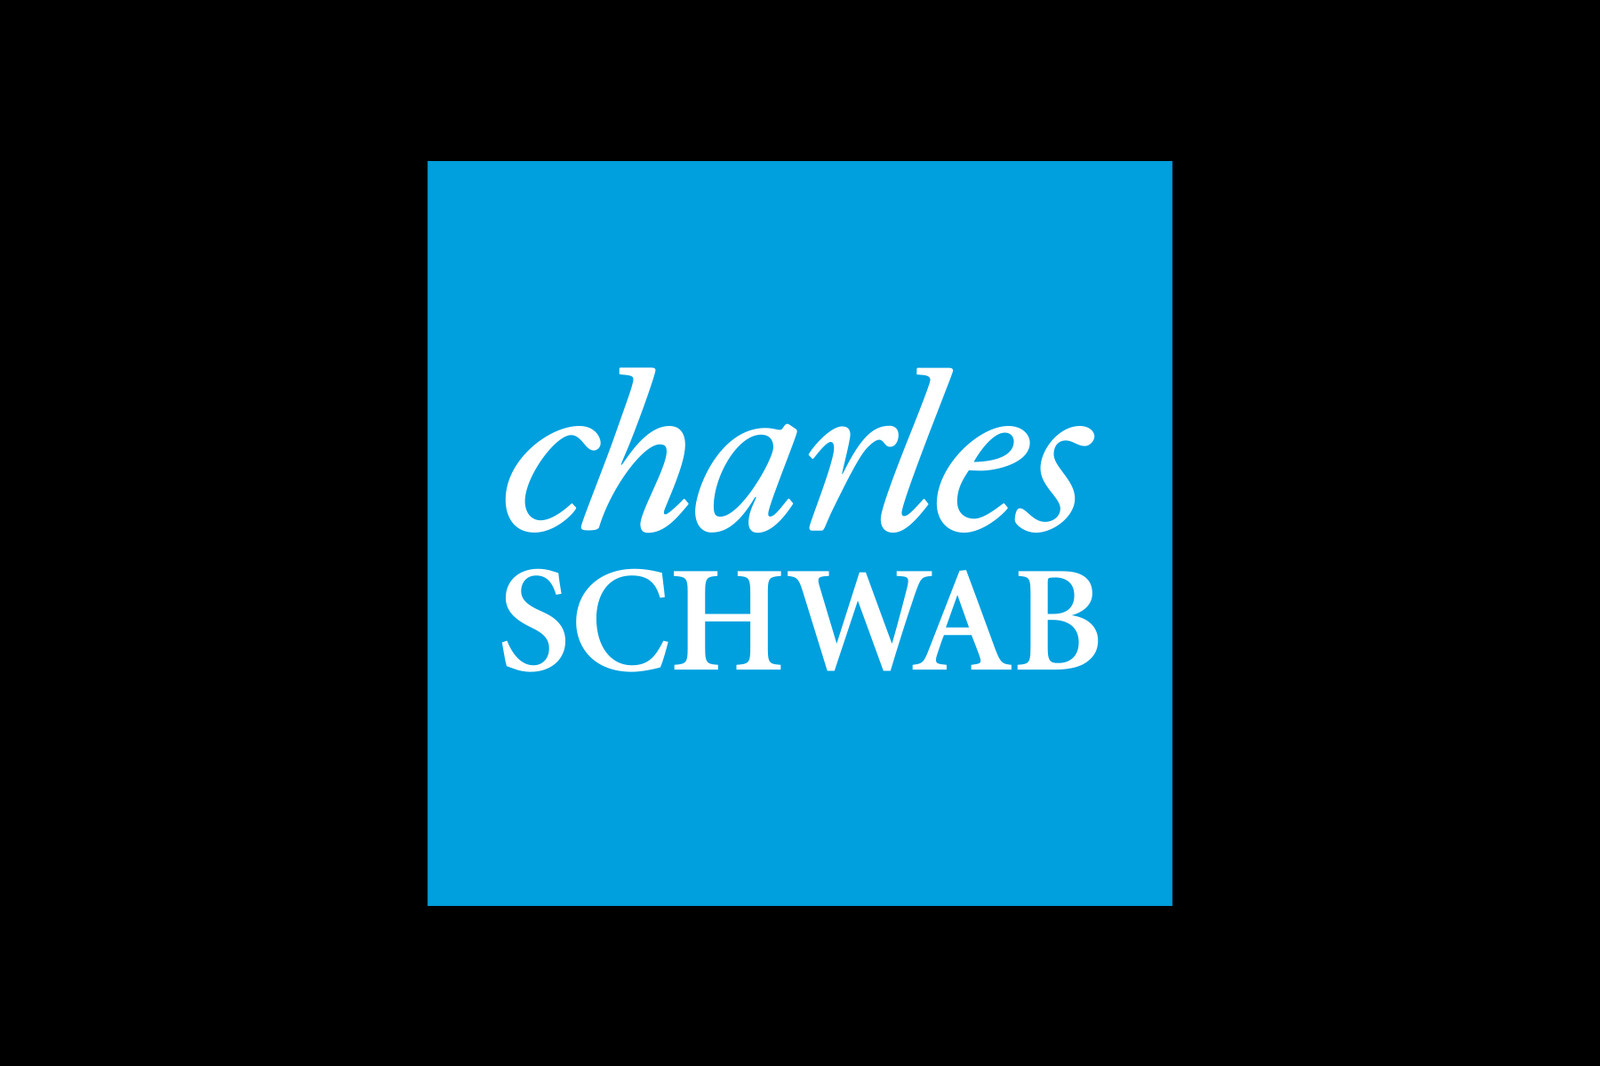 12 Facts About Charles Schwab - Facts.net